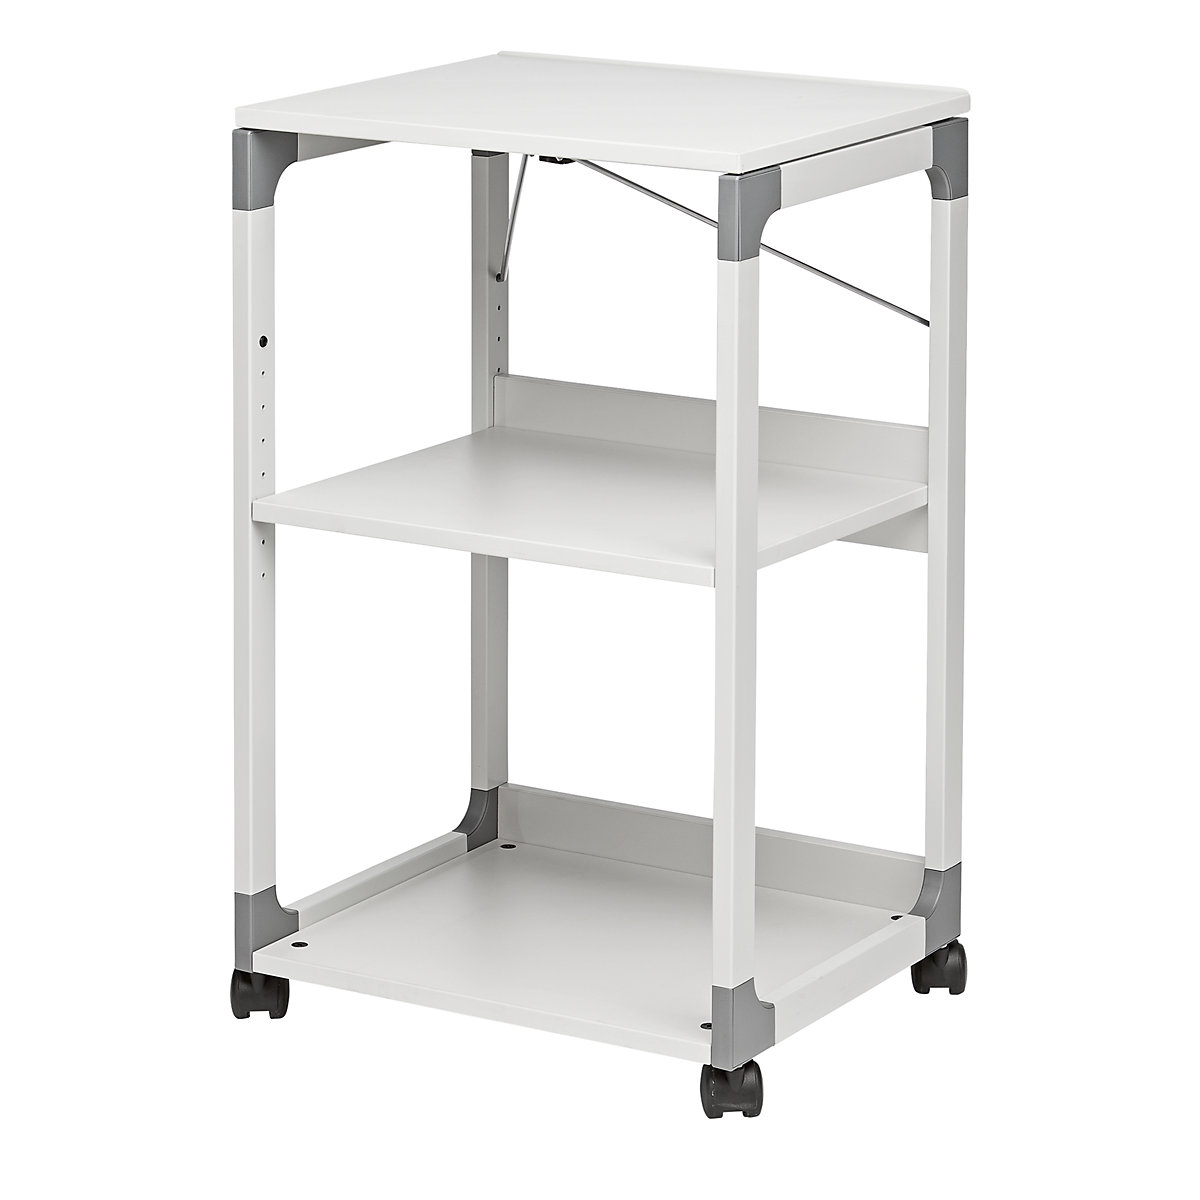 OHP / projector trolley – DURABLE